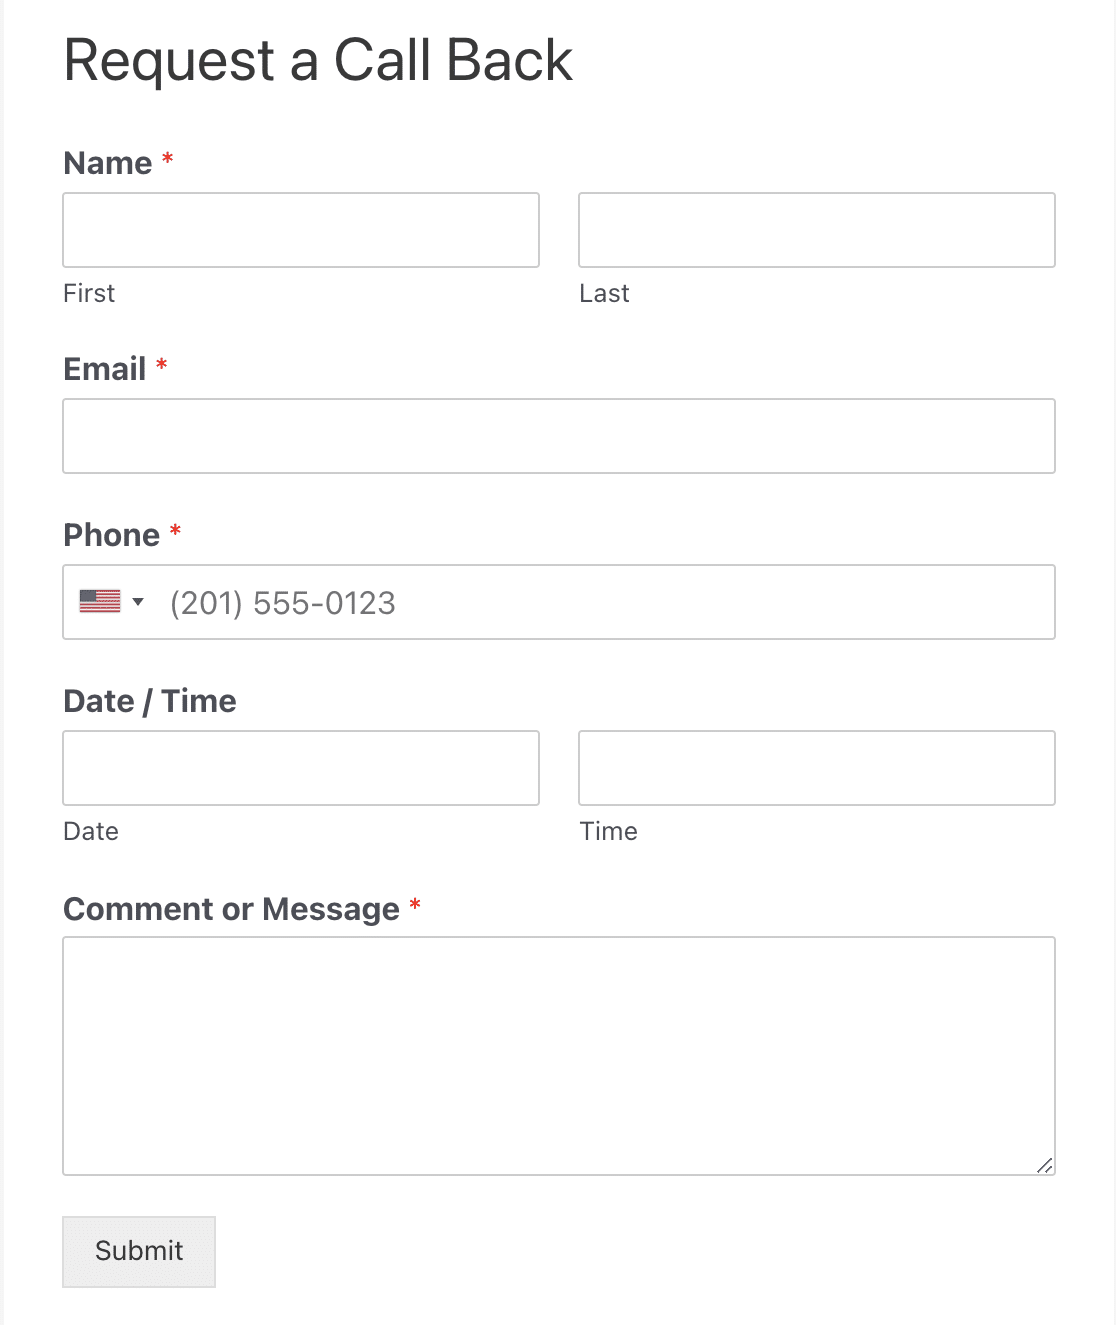 And example of a Request a Call Back form